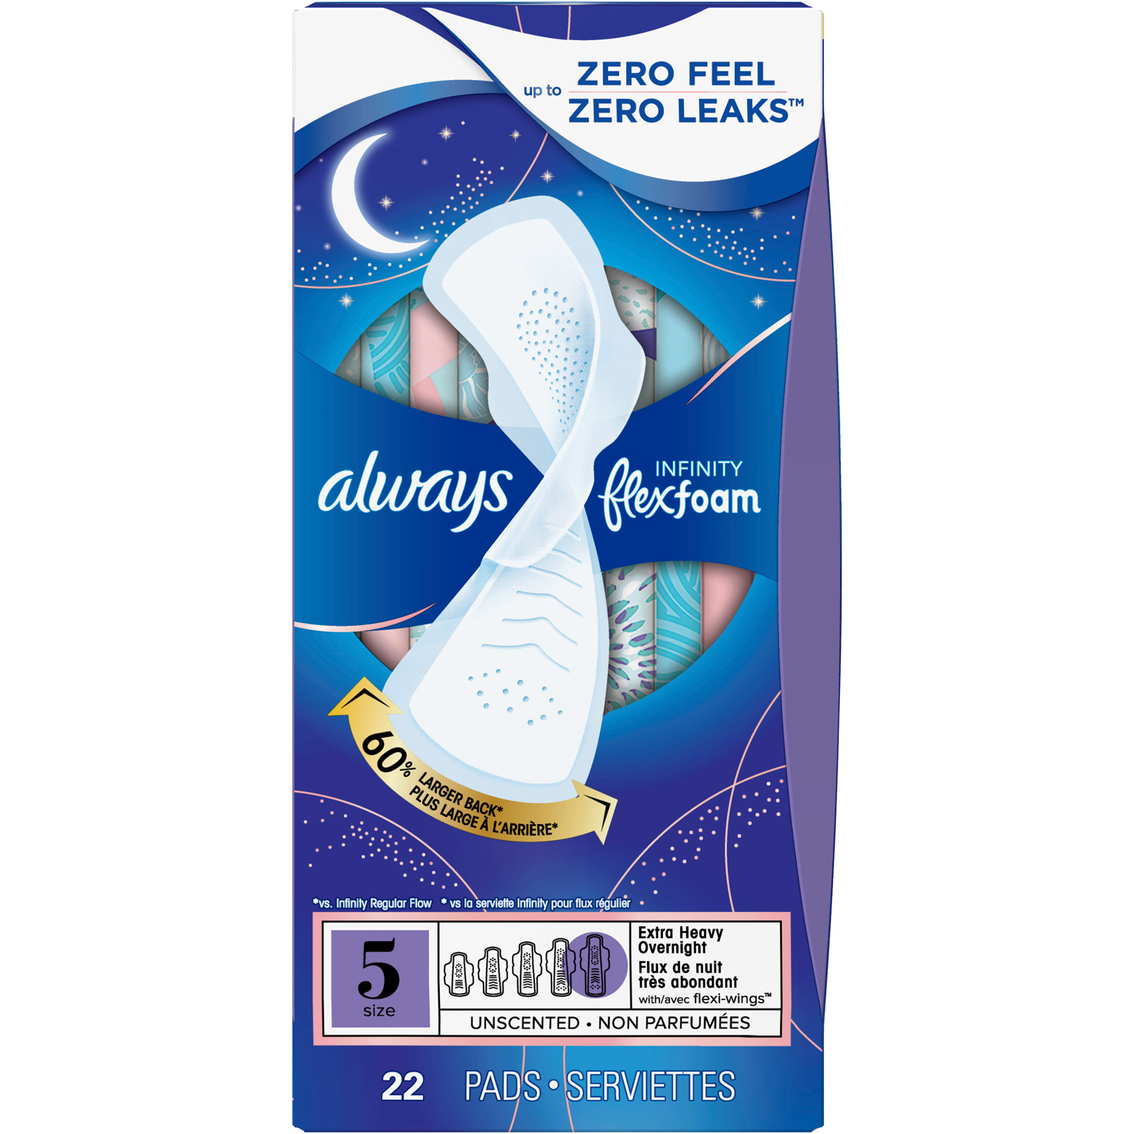 Always Sanitary Pads Size Chart